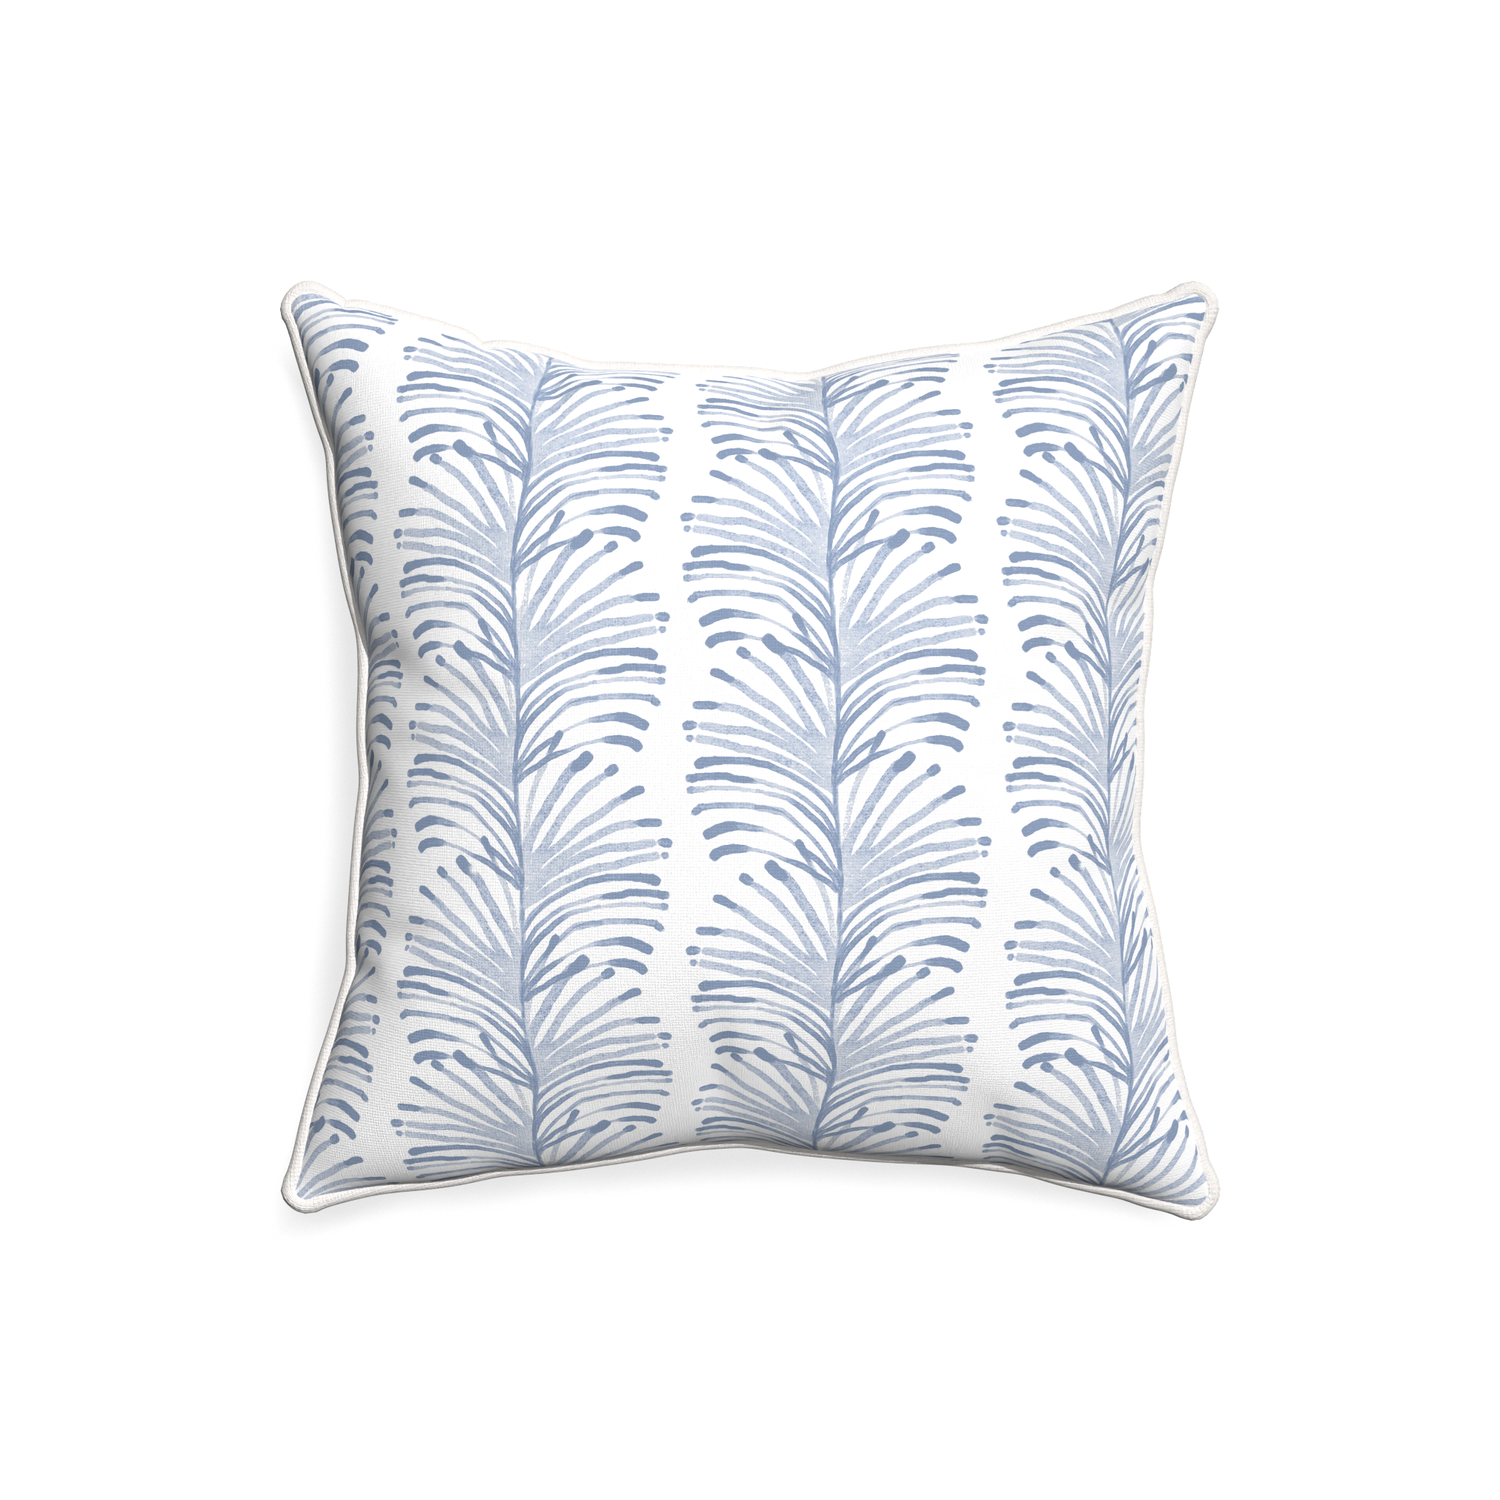 20-square emma sky custom sky blue botanical stripepillow with snow piping on white background